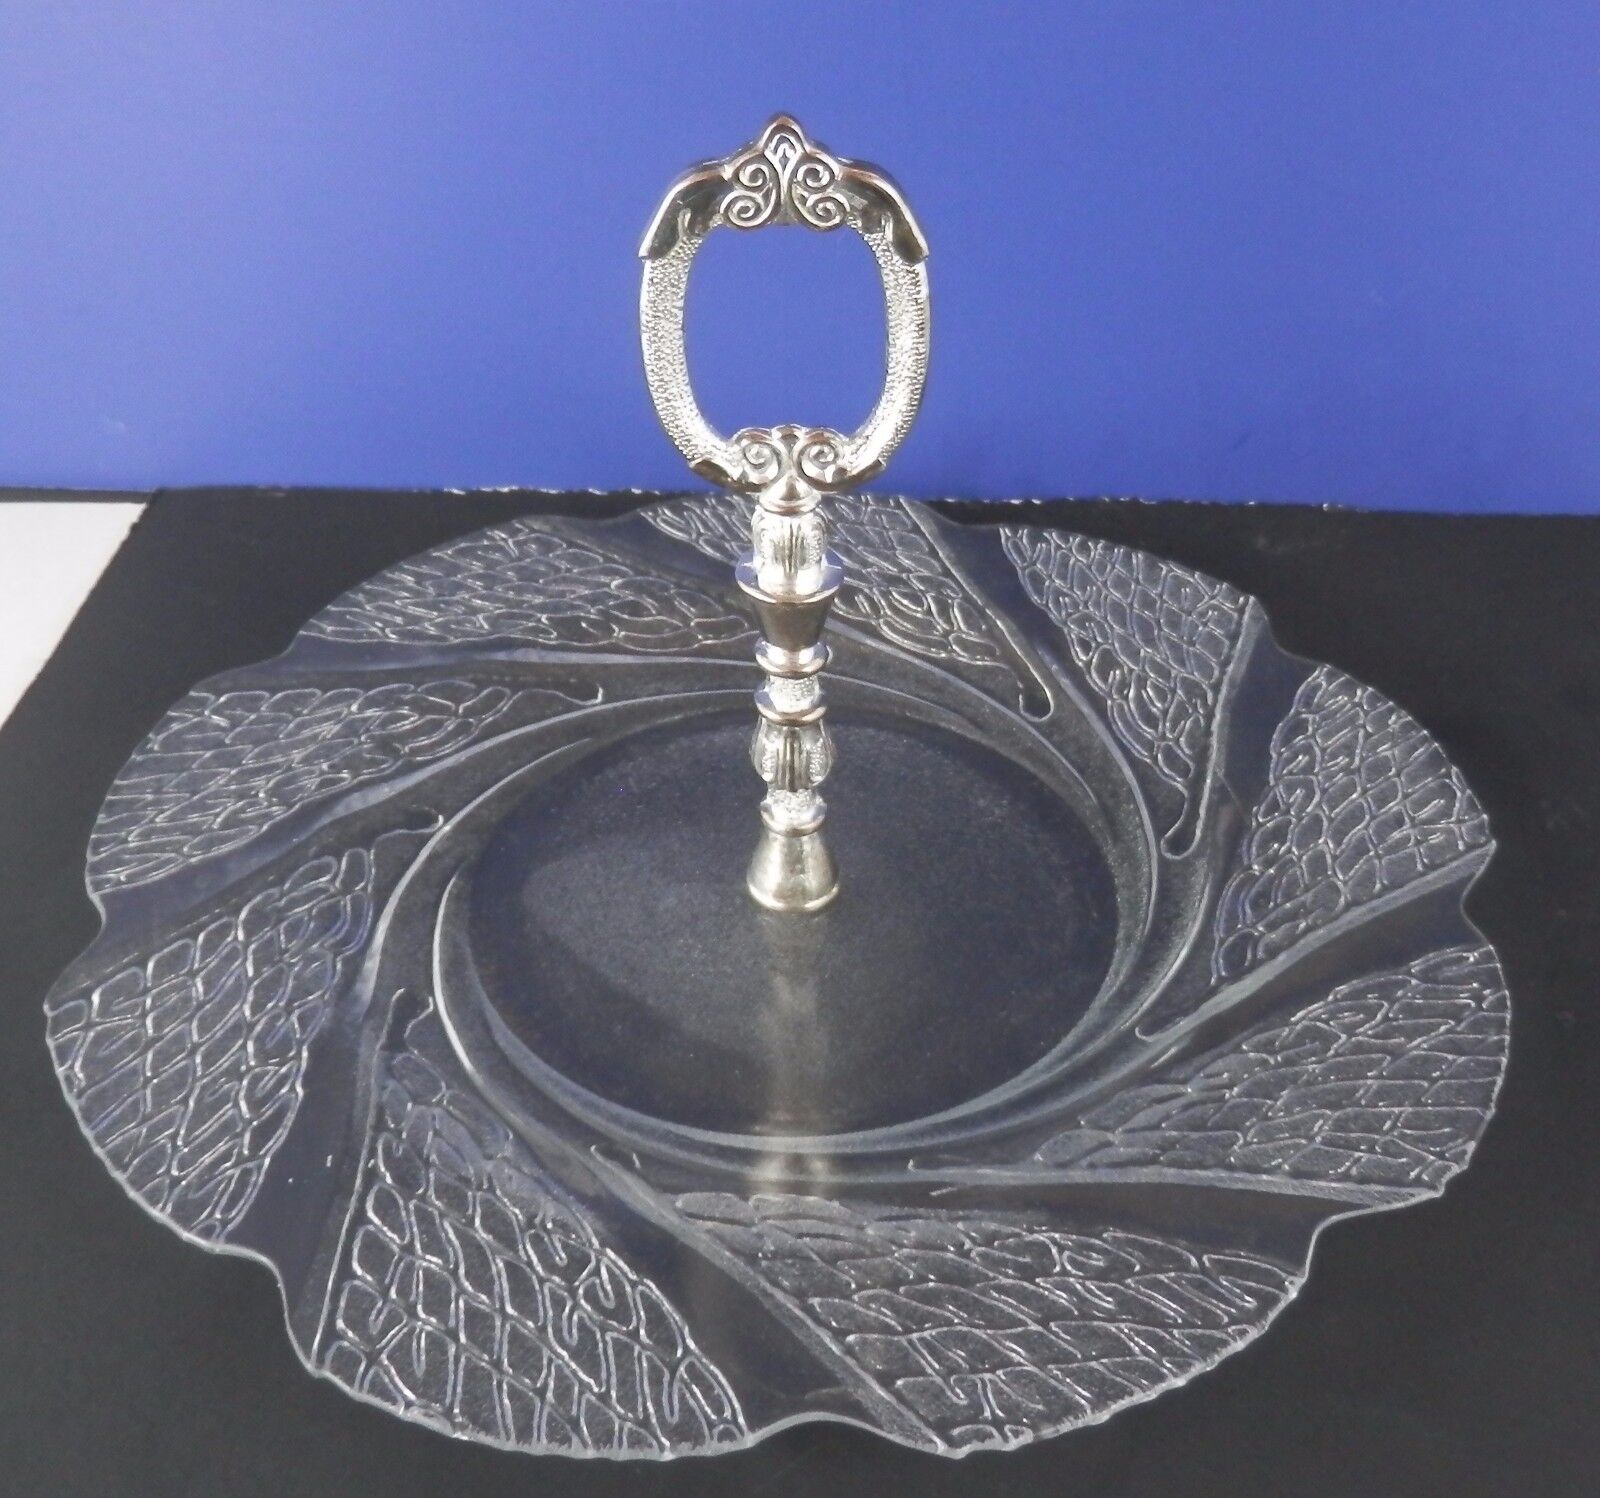 Crystal Serving Tray w silver plated handle Modern Design Fairfield Round In box